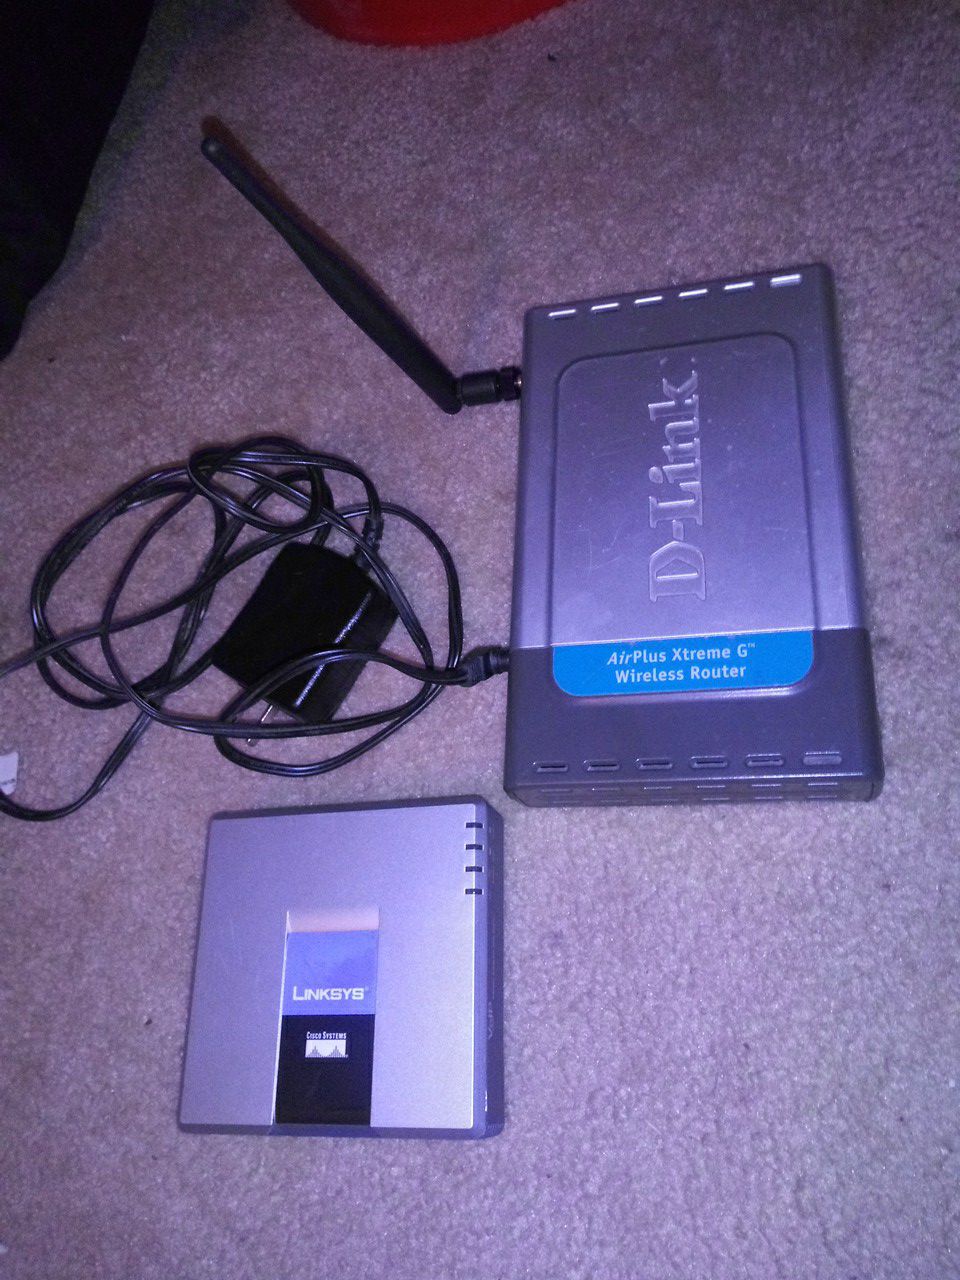 D-link wireless router and phone adapter